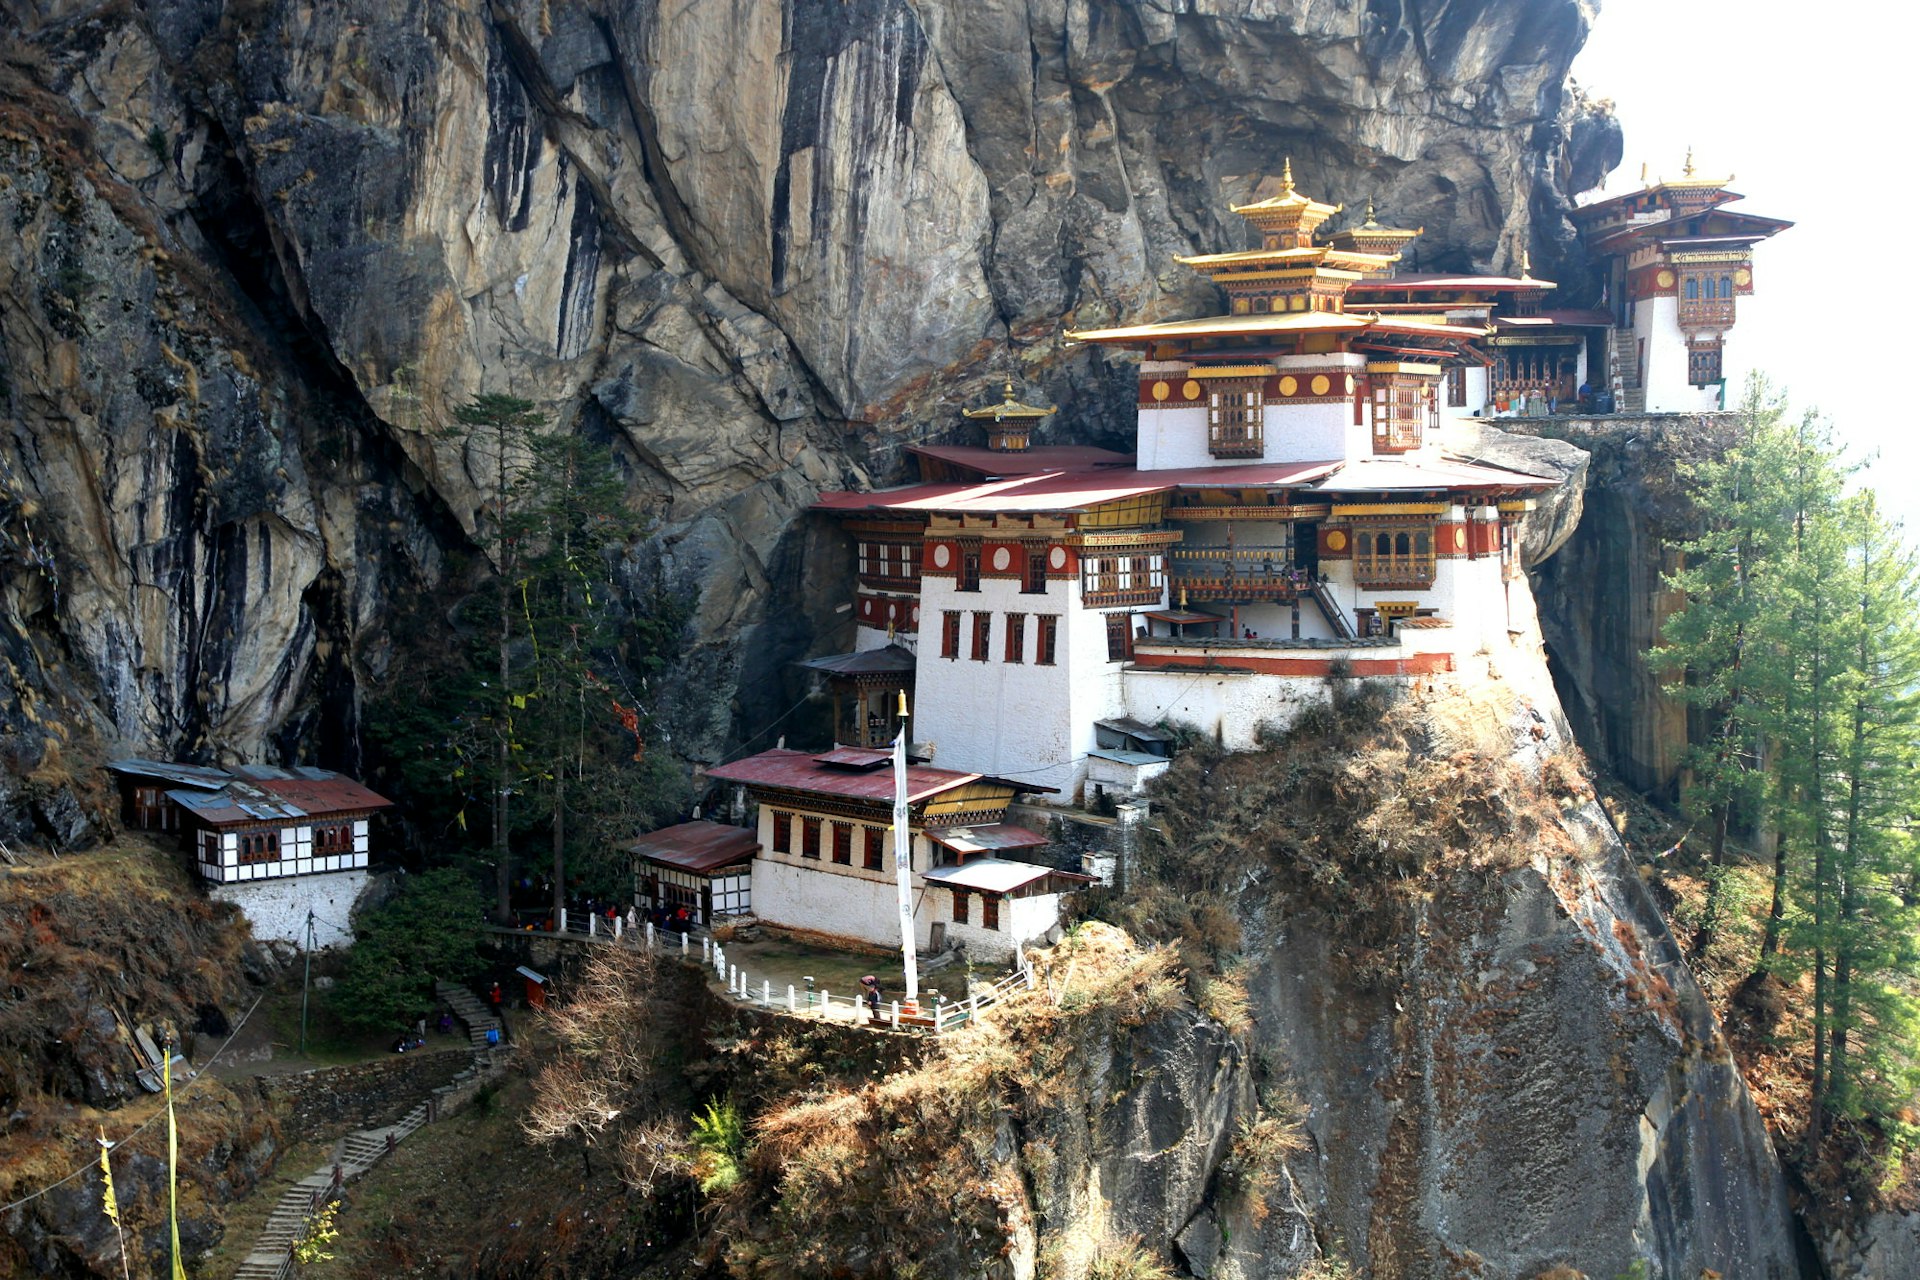 Taktshang, the Tiger’s Nest, a highlight of any trip to Bhutan © Bradley Mayhew / Lonely Planet